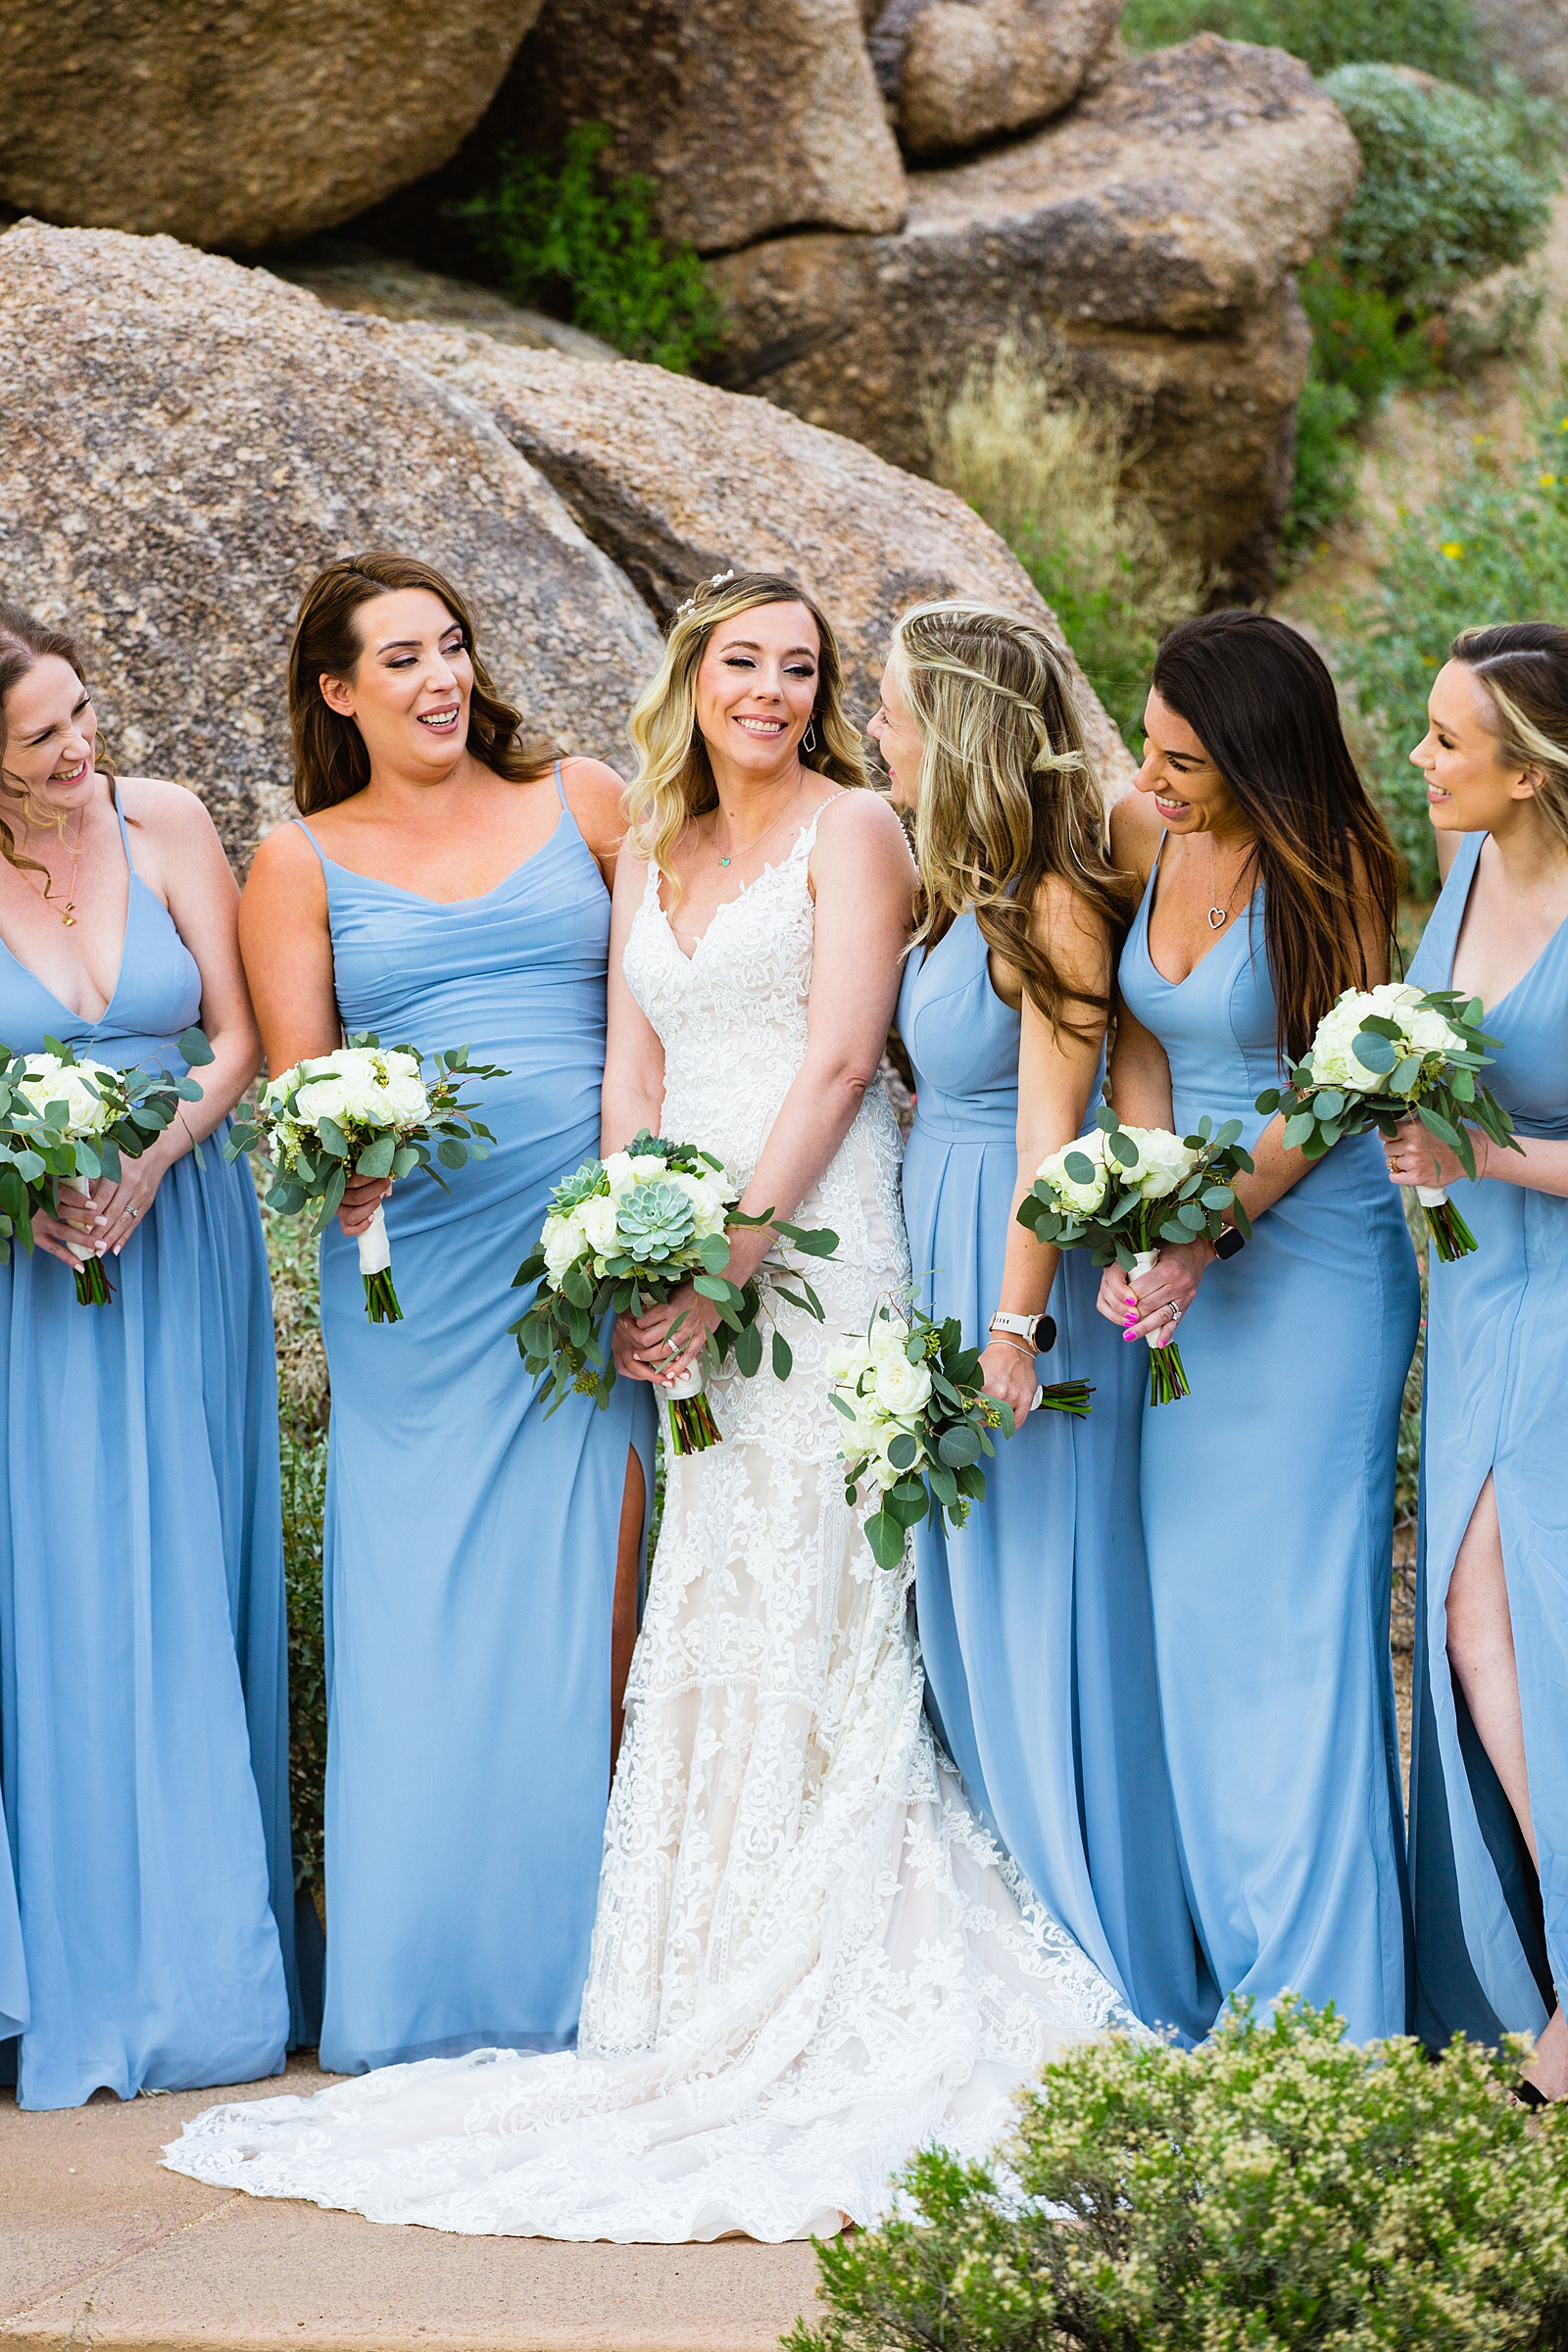 Bride and bridesmaids laughing together at Troon North wedding by Scottsdale wedding photographer PMA Photography.